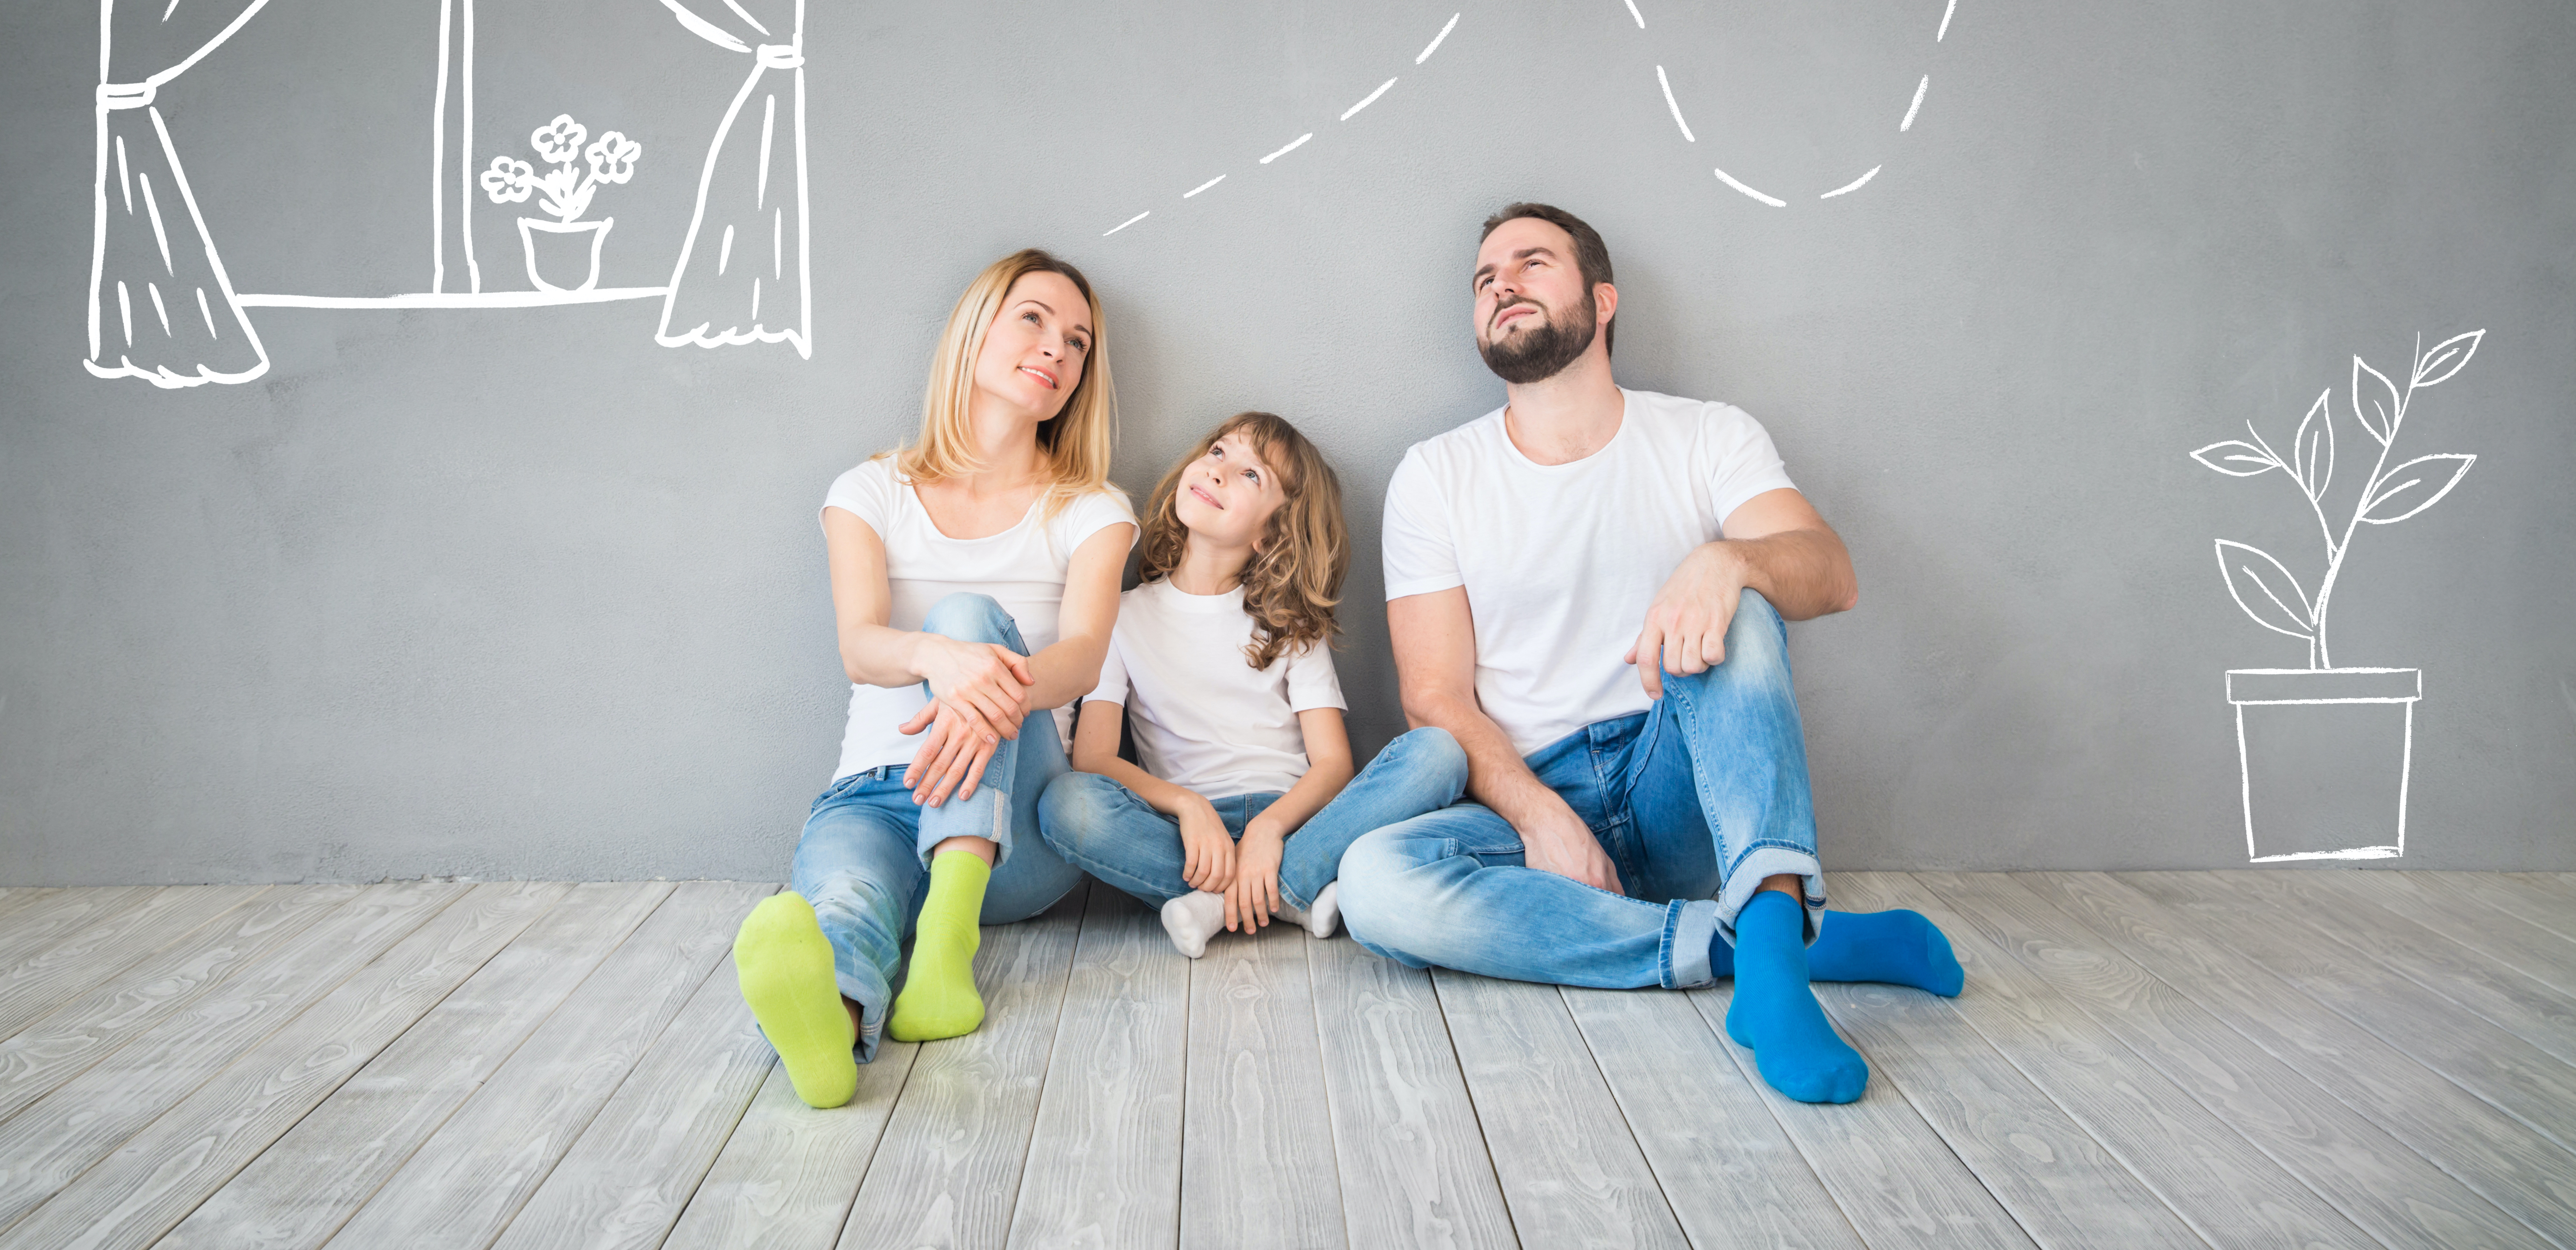 eco-friendly flooring featured image: a family dreaming of sustainability